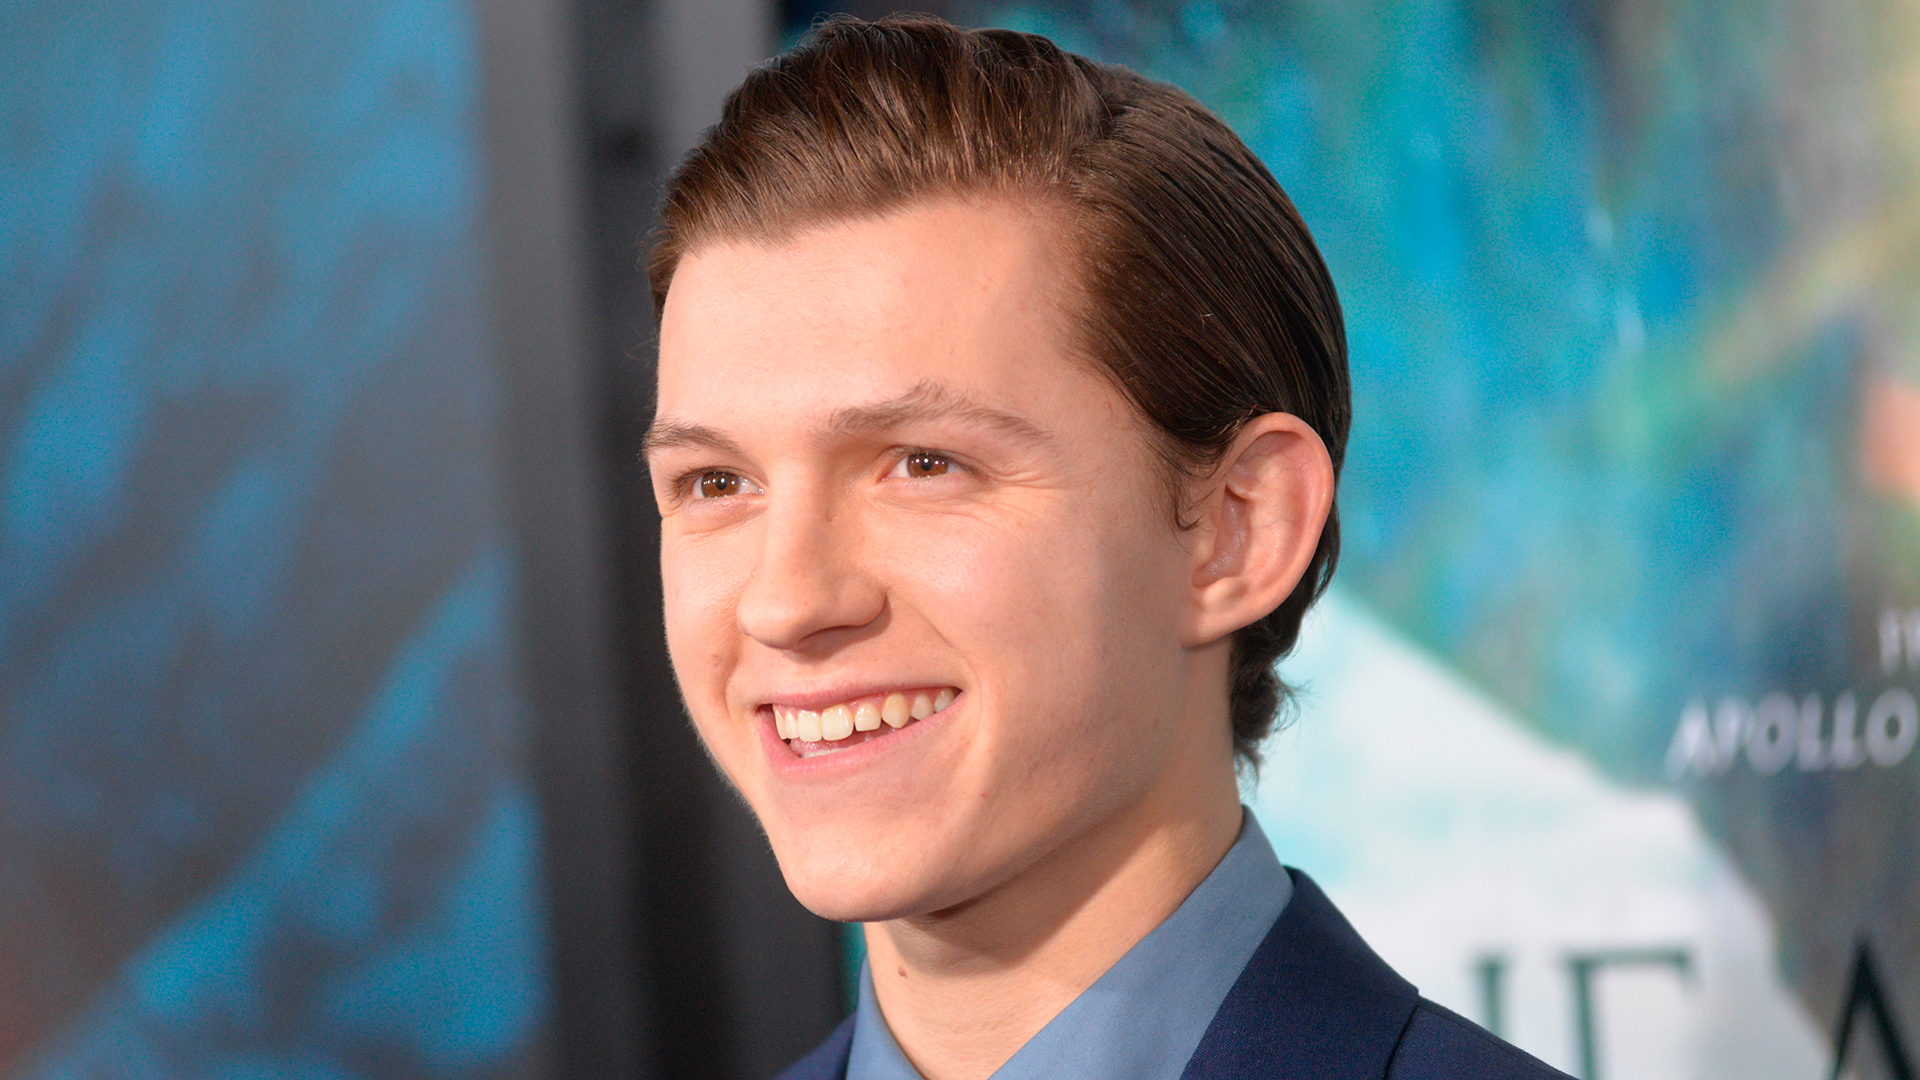 Spider Man's' Tom Holland On 'Stealing' From Tobey Maguire, Garfield